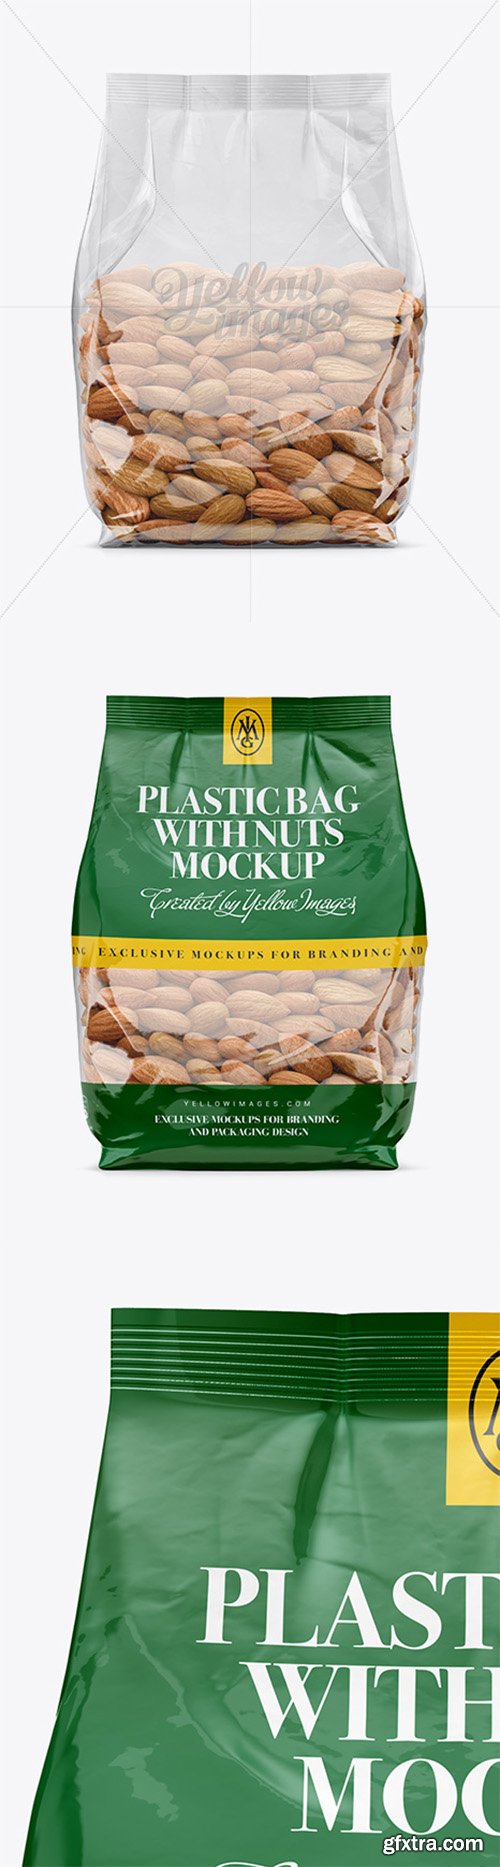 Clear Bag With Almonds Mockup - Front View 14582